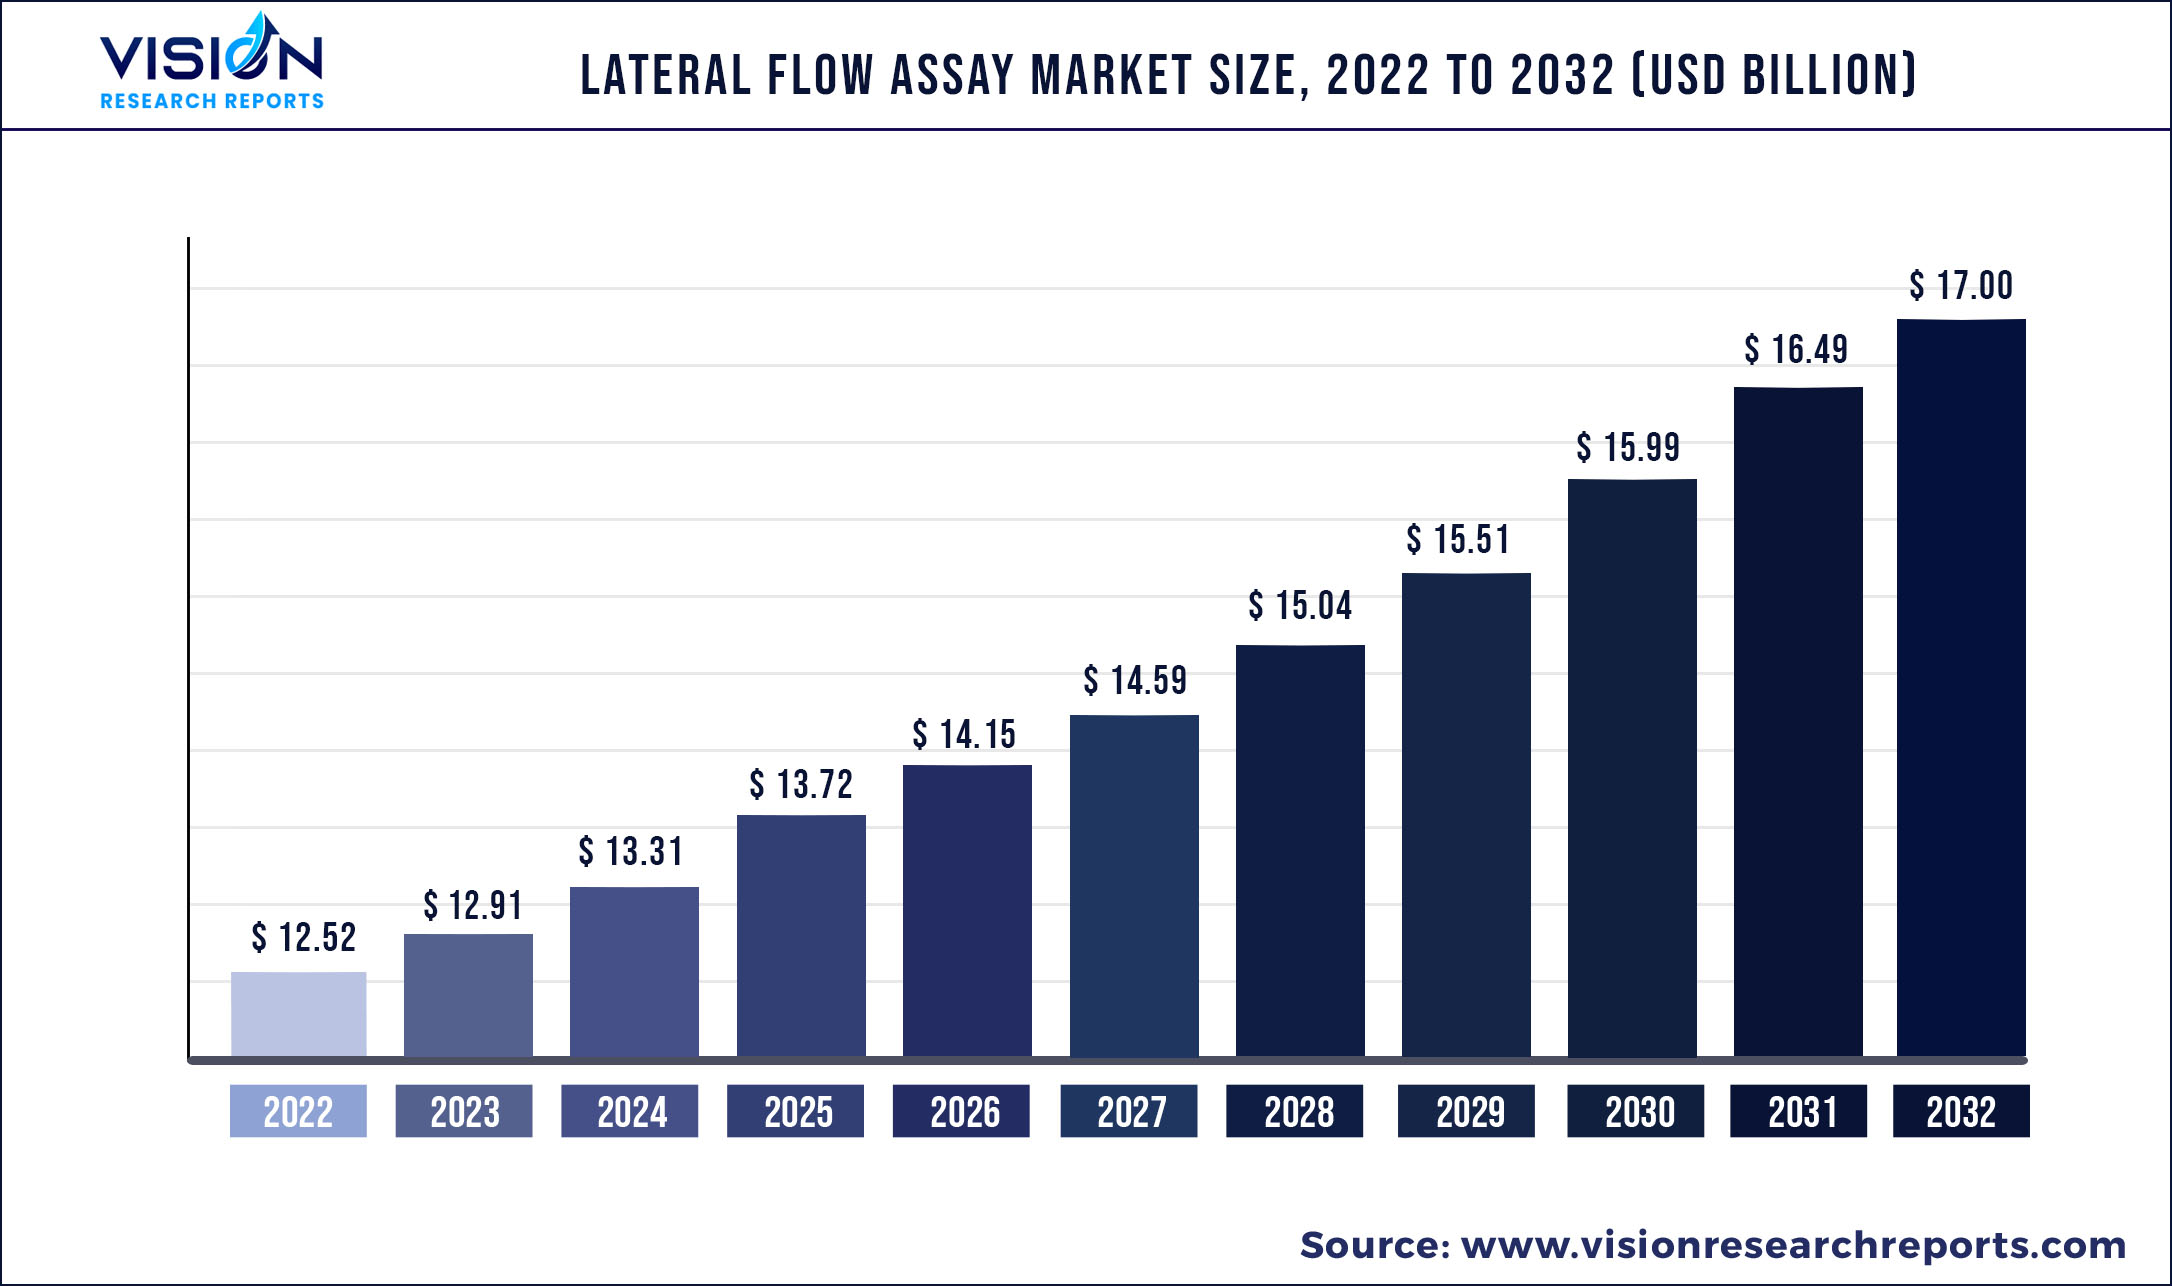 Lateral Flow Assay Market Size 2023 to 2032